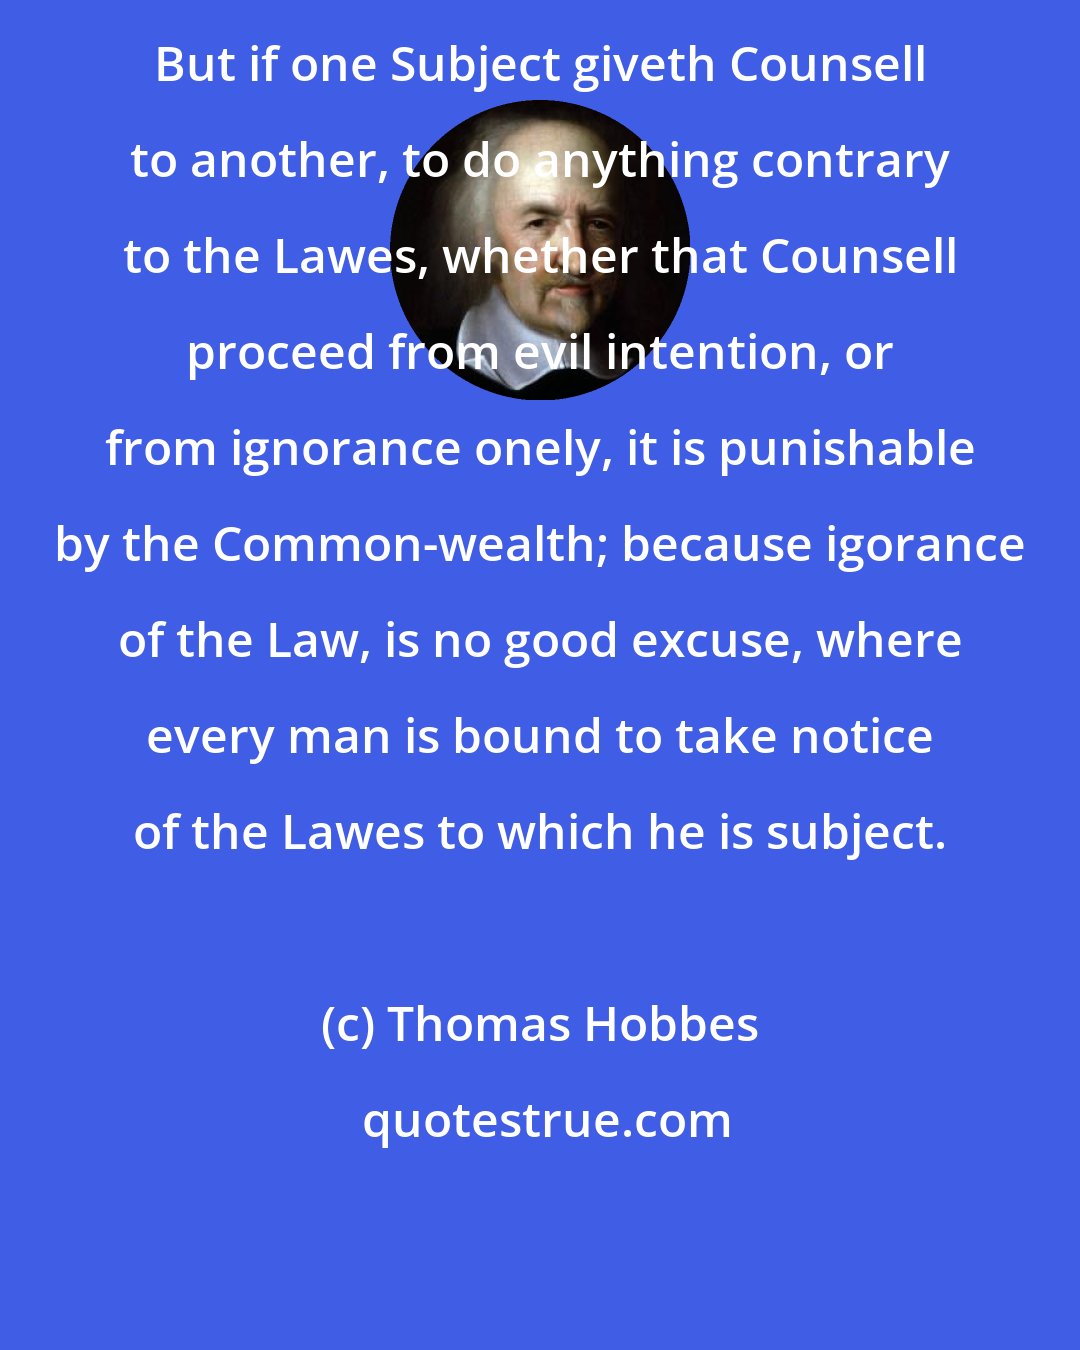 Thomas Hobbes: But if one Subject giveth Counsell to another, to do anything contrary to the Lawes, whether that Counsell proceed from evil intention, or from ignorance onely, it is punishable by the Common-wealth; because igorance of the Law, is no good excuse, where every man is bound to take notice of the Lawes to which he is subject.